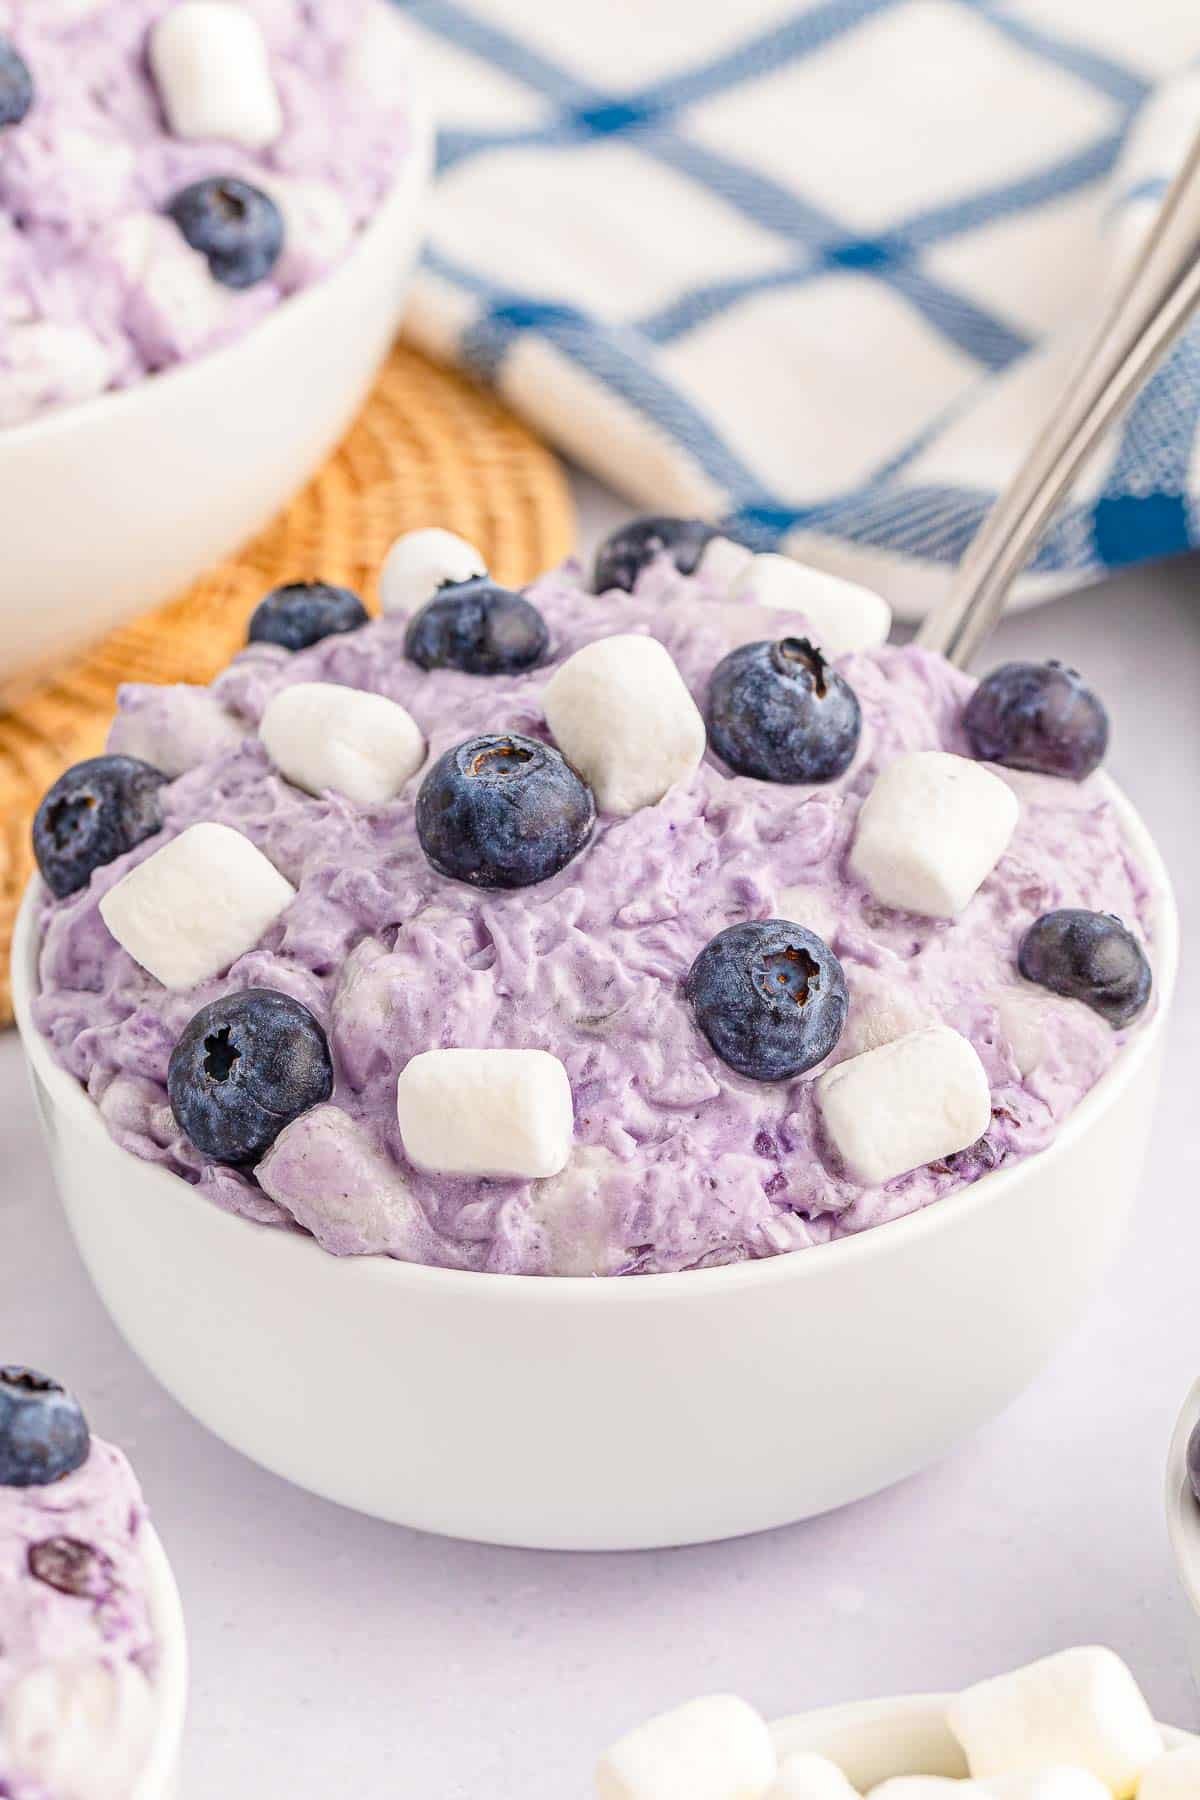 Blueberry fluff topped with mini marshmallows and blueberries in a white bowl.